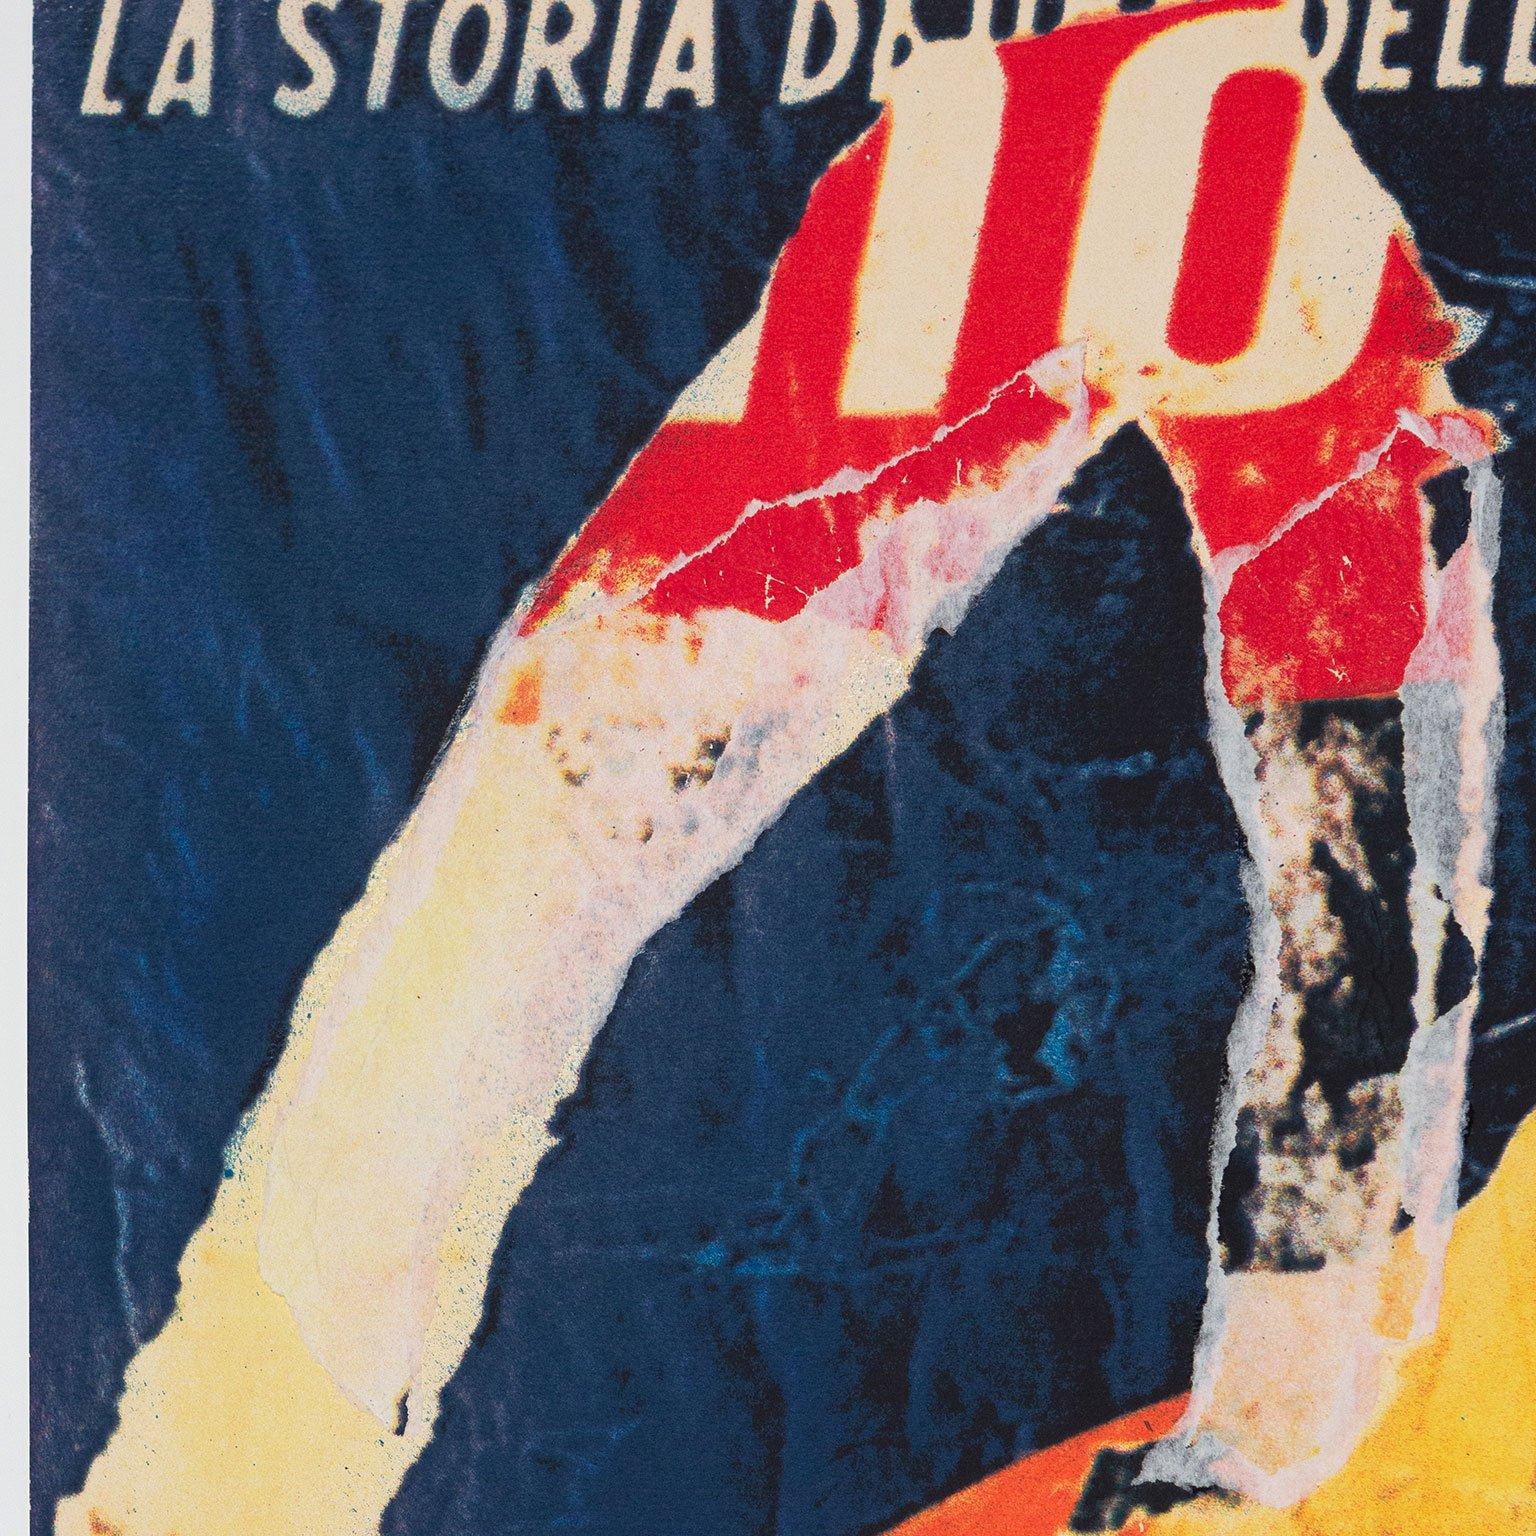 Mimmo Rotella (1918-2006) was an Italian artist and leading figure of post-war European art. He is best known for creating layered collage-like works from torn film and advertising posters.

Although Rotella began his artistic career as a geometric